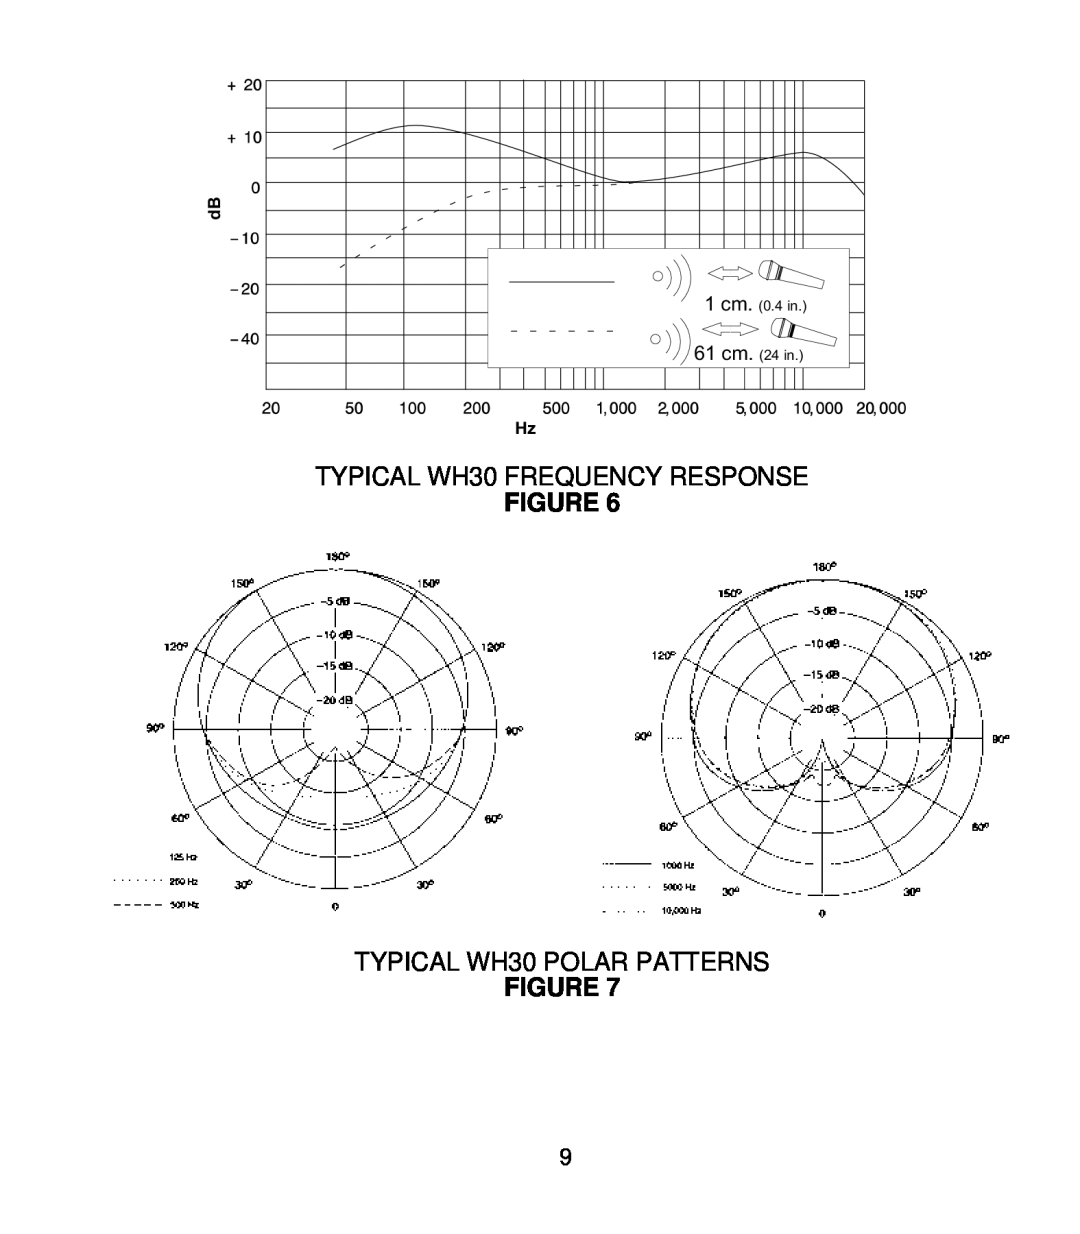 Shure manual TYPICAL WH30 FREQUENCY RESPONSE, TYPICAL WH30 POLAR PATTERNS, 61 cm. 24 in, 1 cm. 0.4 in 